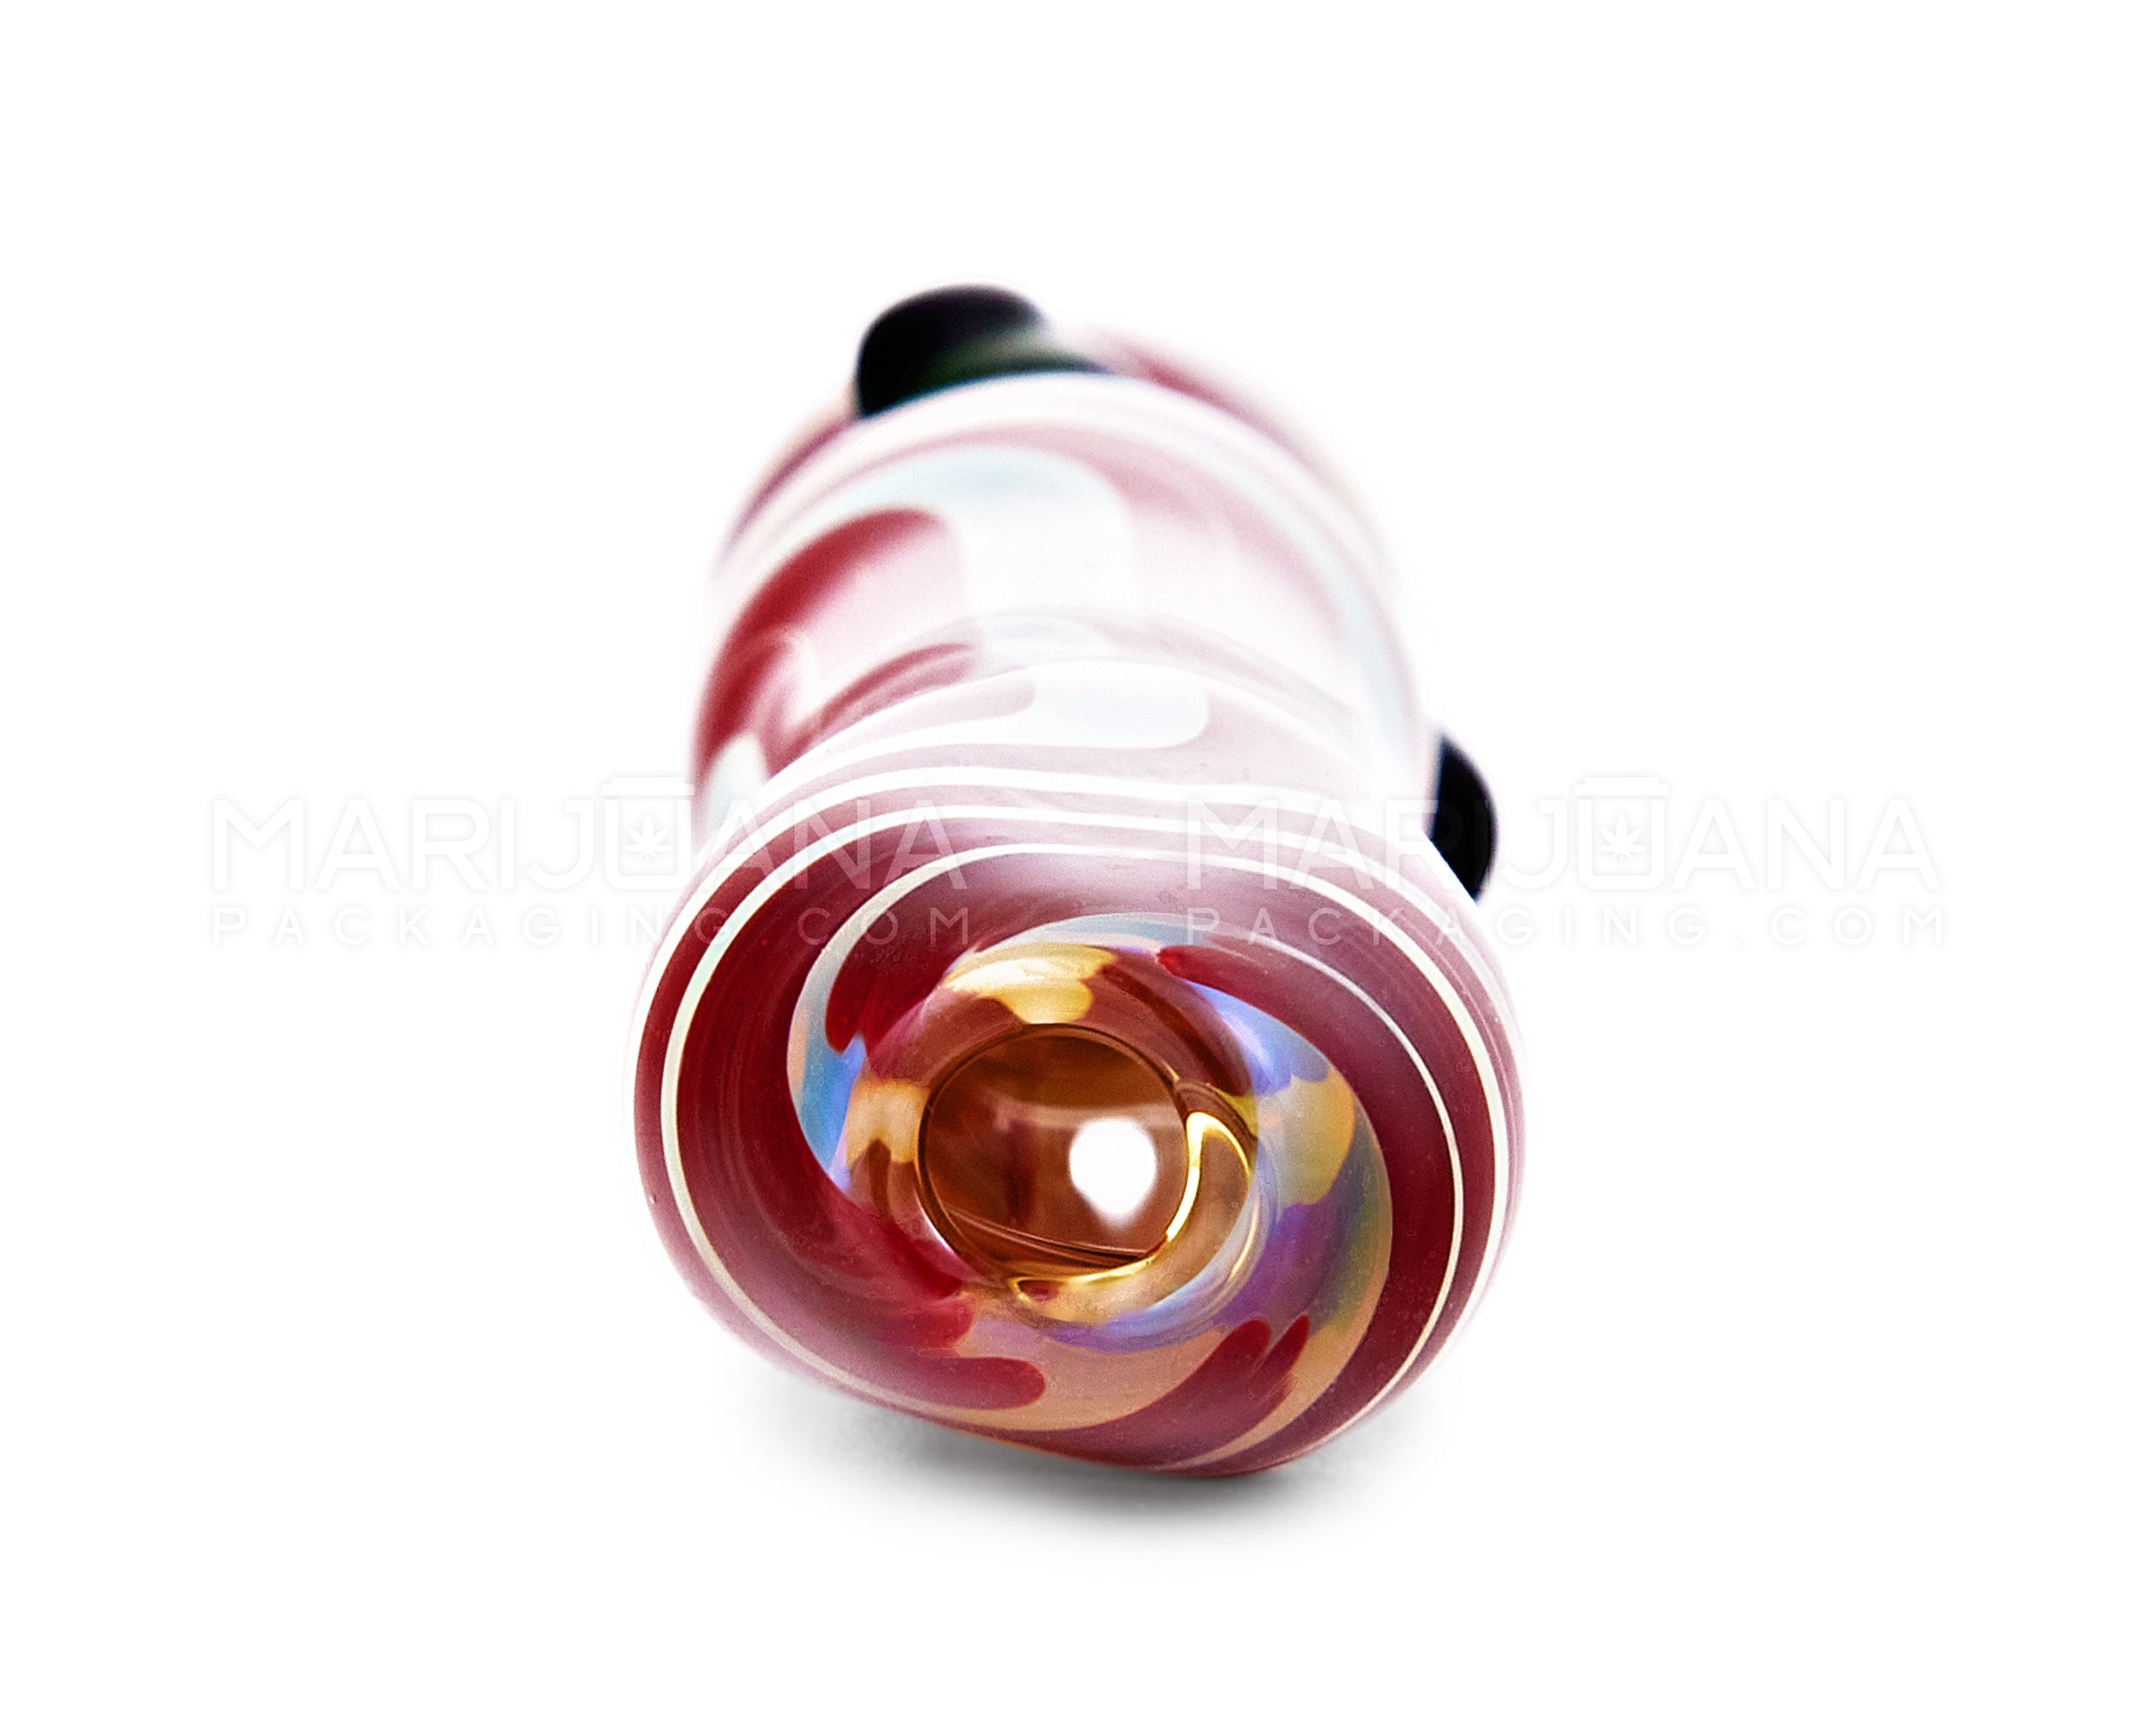 USA Glass | Swirl & Gold Fumed Chillum Hand Pipe w/ Triple Knockers | 3.5in Long - Glass - Assorted - 3